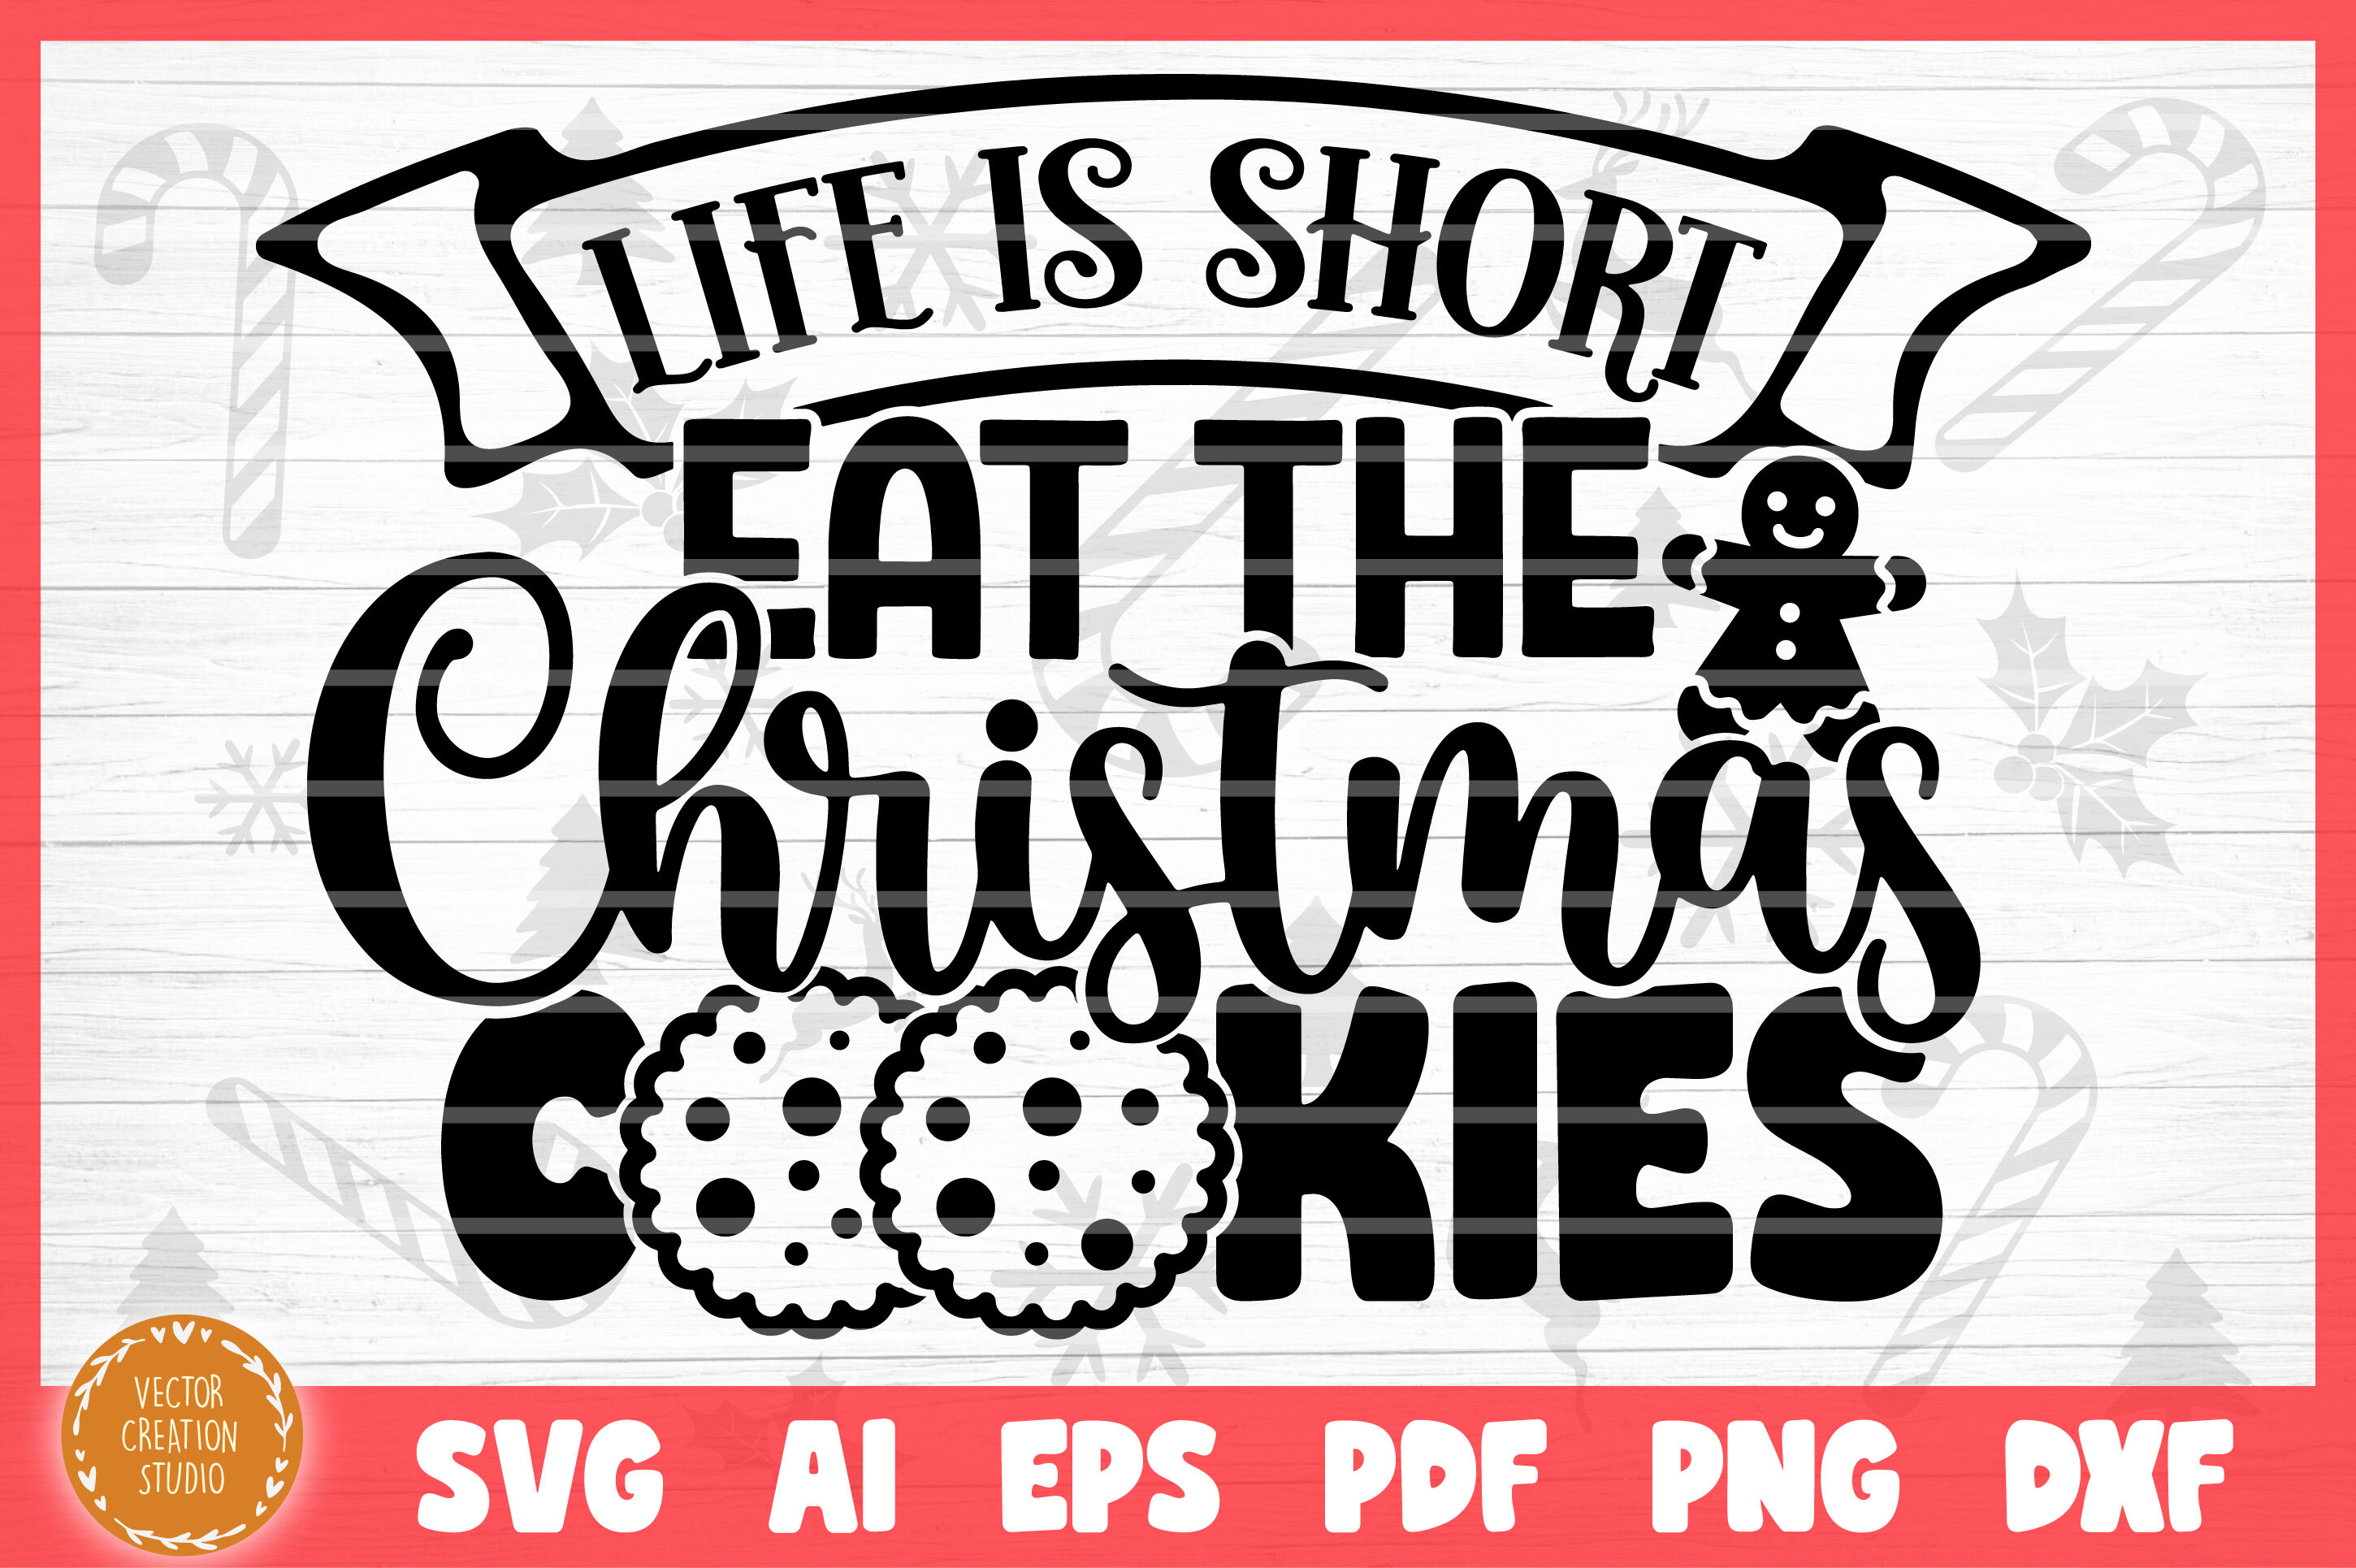 Download Life Is Short Eat The Christmas Cookie Christmas Baking Svg Cut File By Vectorcreationstudio Thehungryjpeg Com